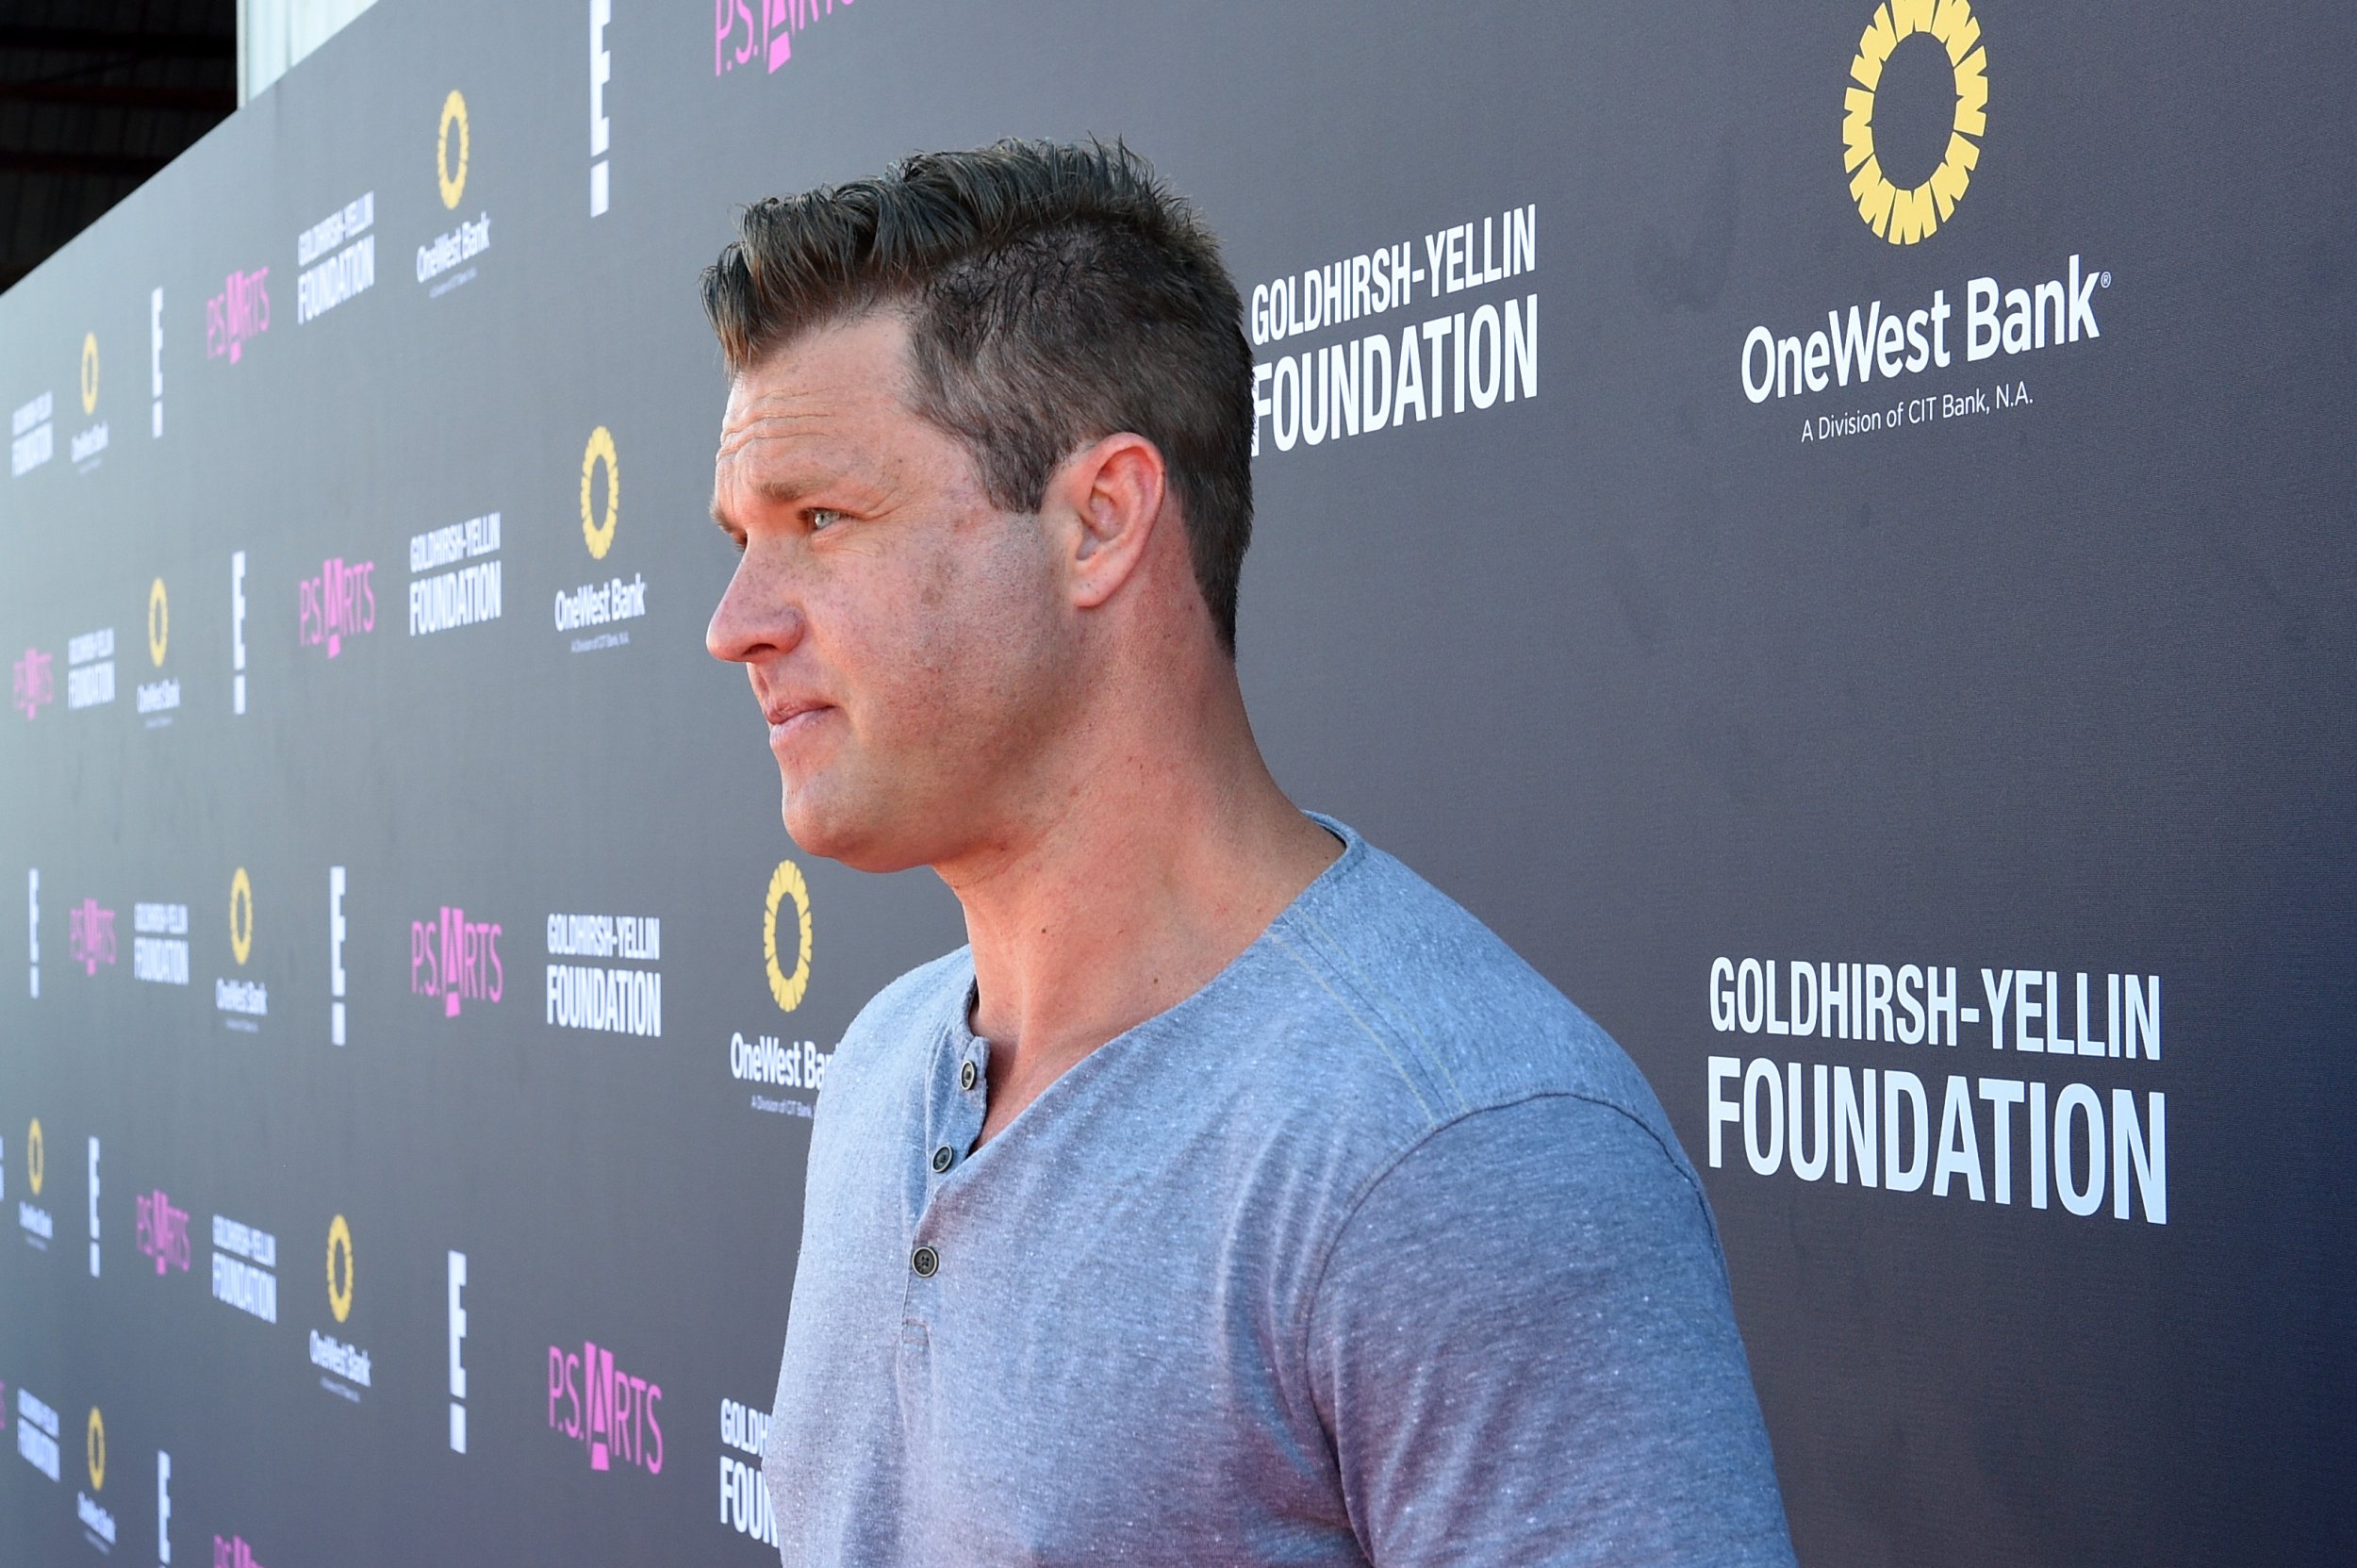 Home Improvement Star Zachery Ty Bryan Released On Bail A Day After Arrest Ibtimes